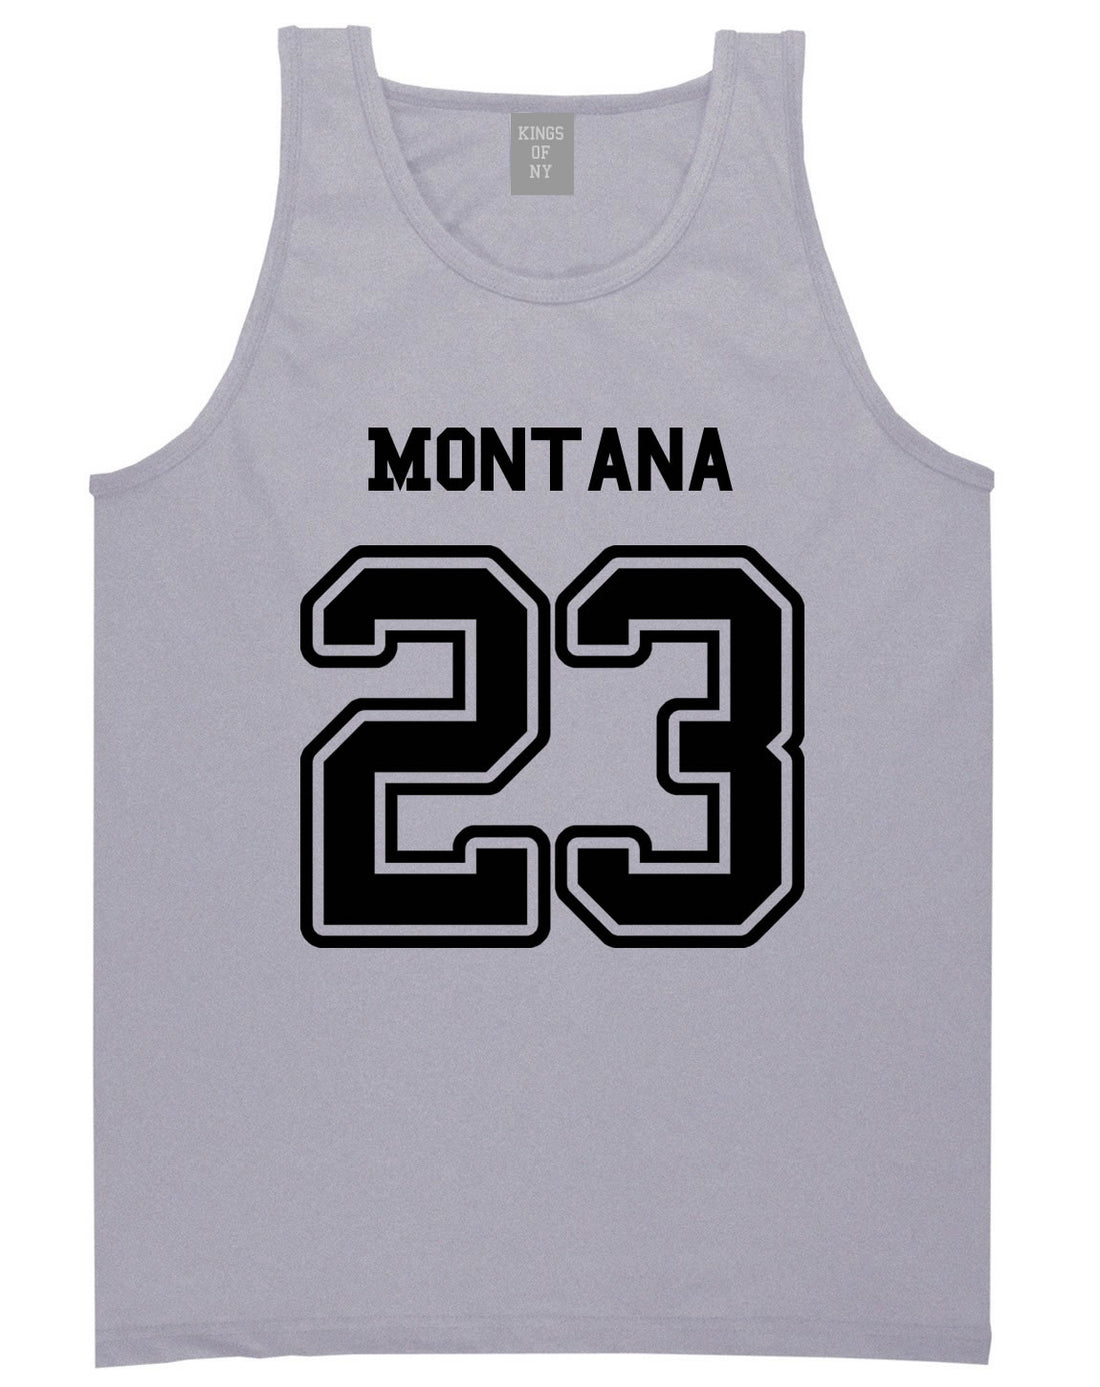 Sport Style Montana 23 Team State Jersey Mens Tank Top By Kings Of NY